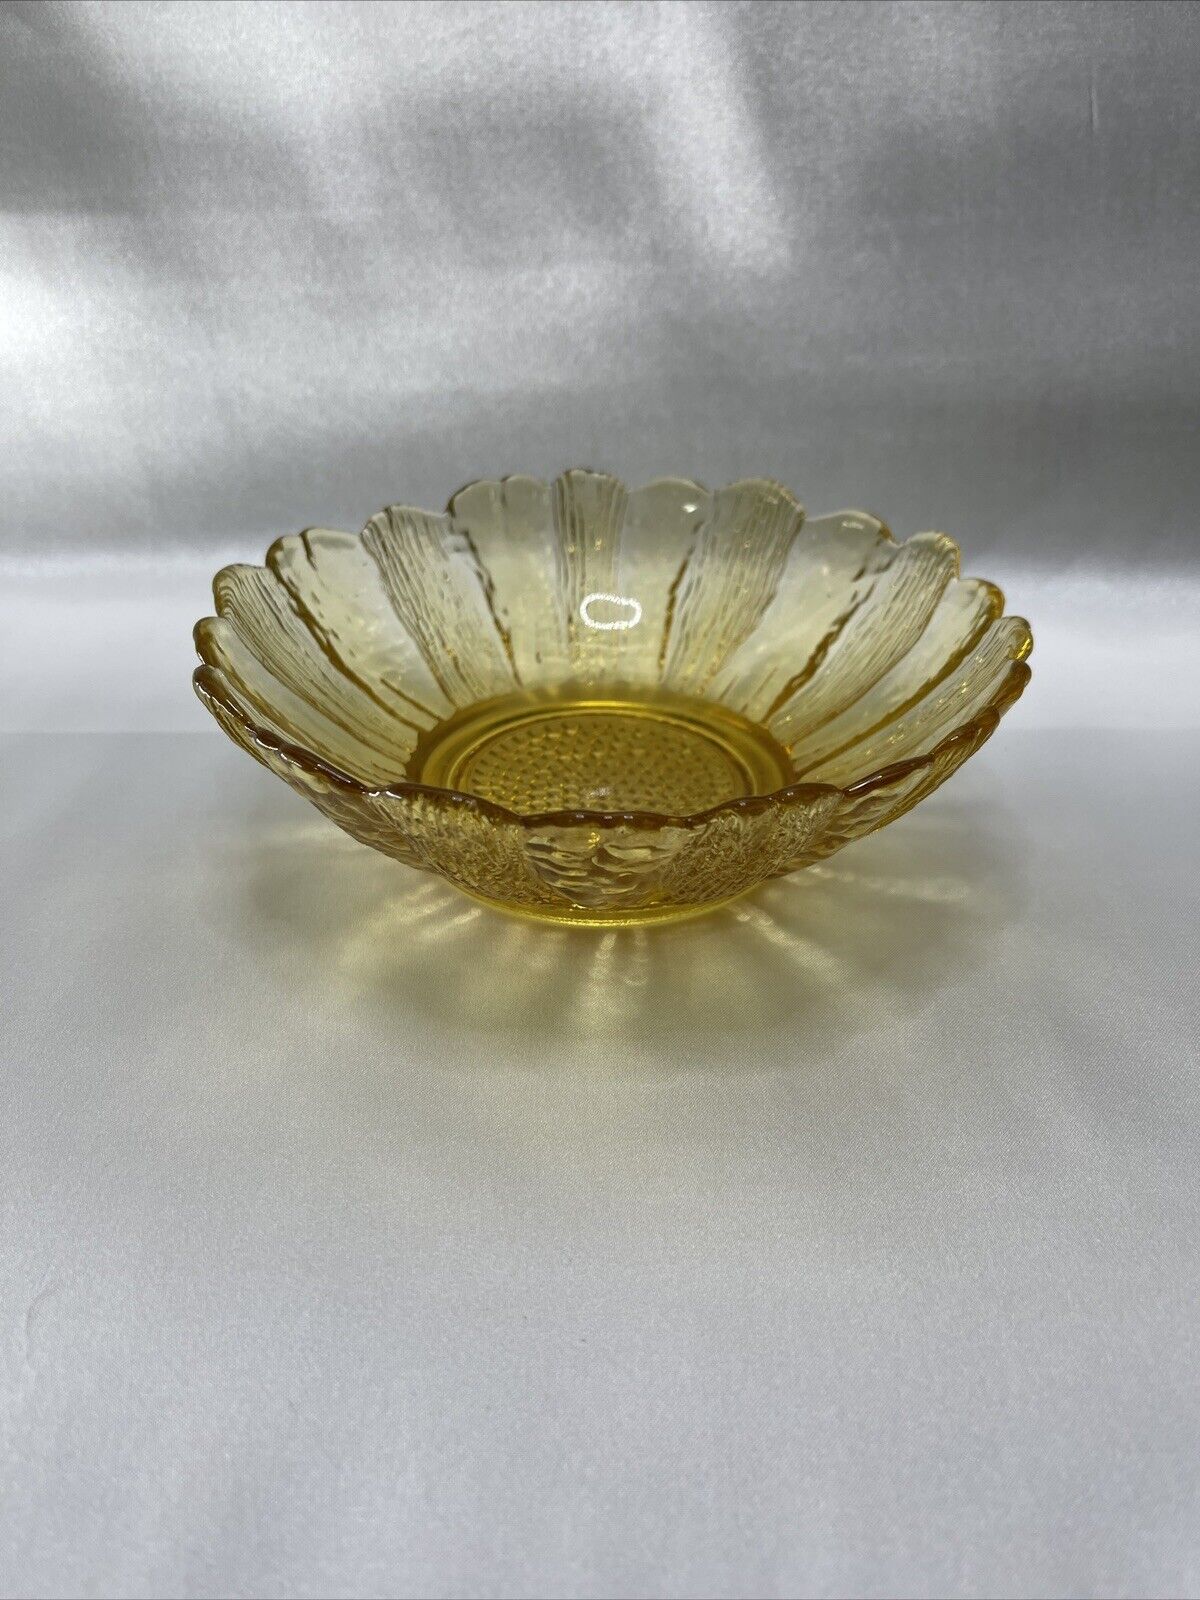 VTG Anchor Hocking Flower Amber Glass Candy 1960s Dish Trinket Soup Bowl 6.25 in